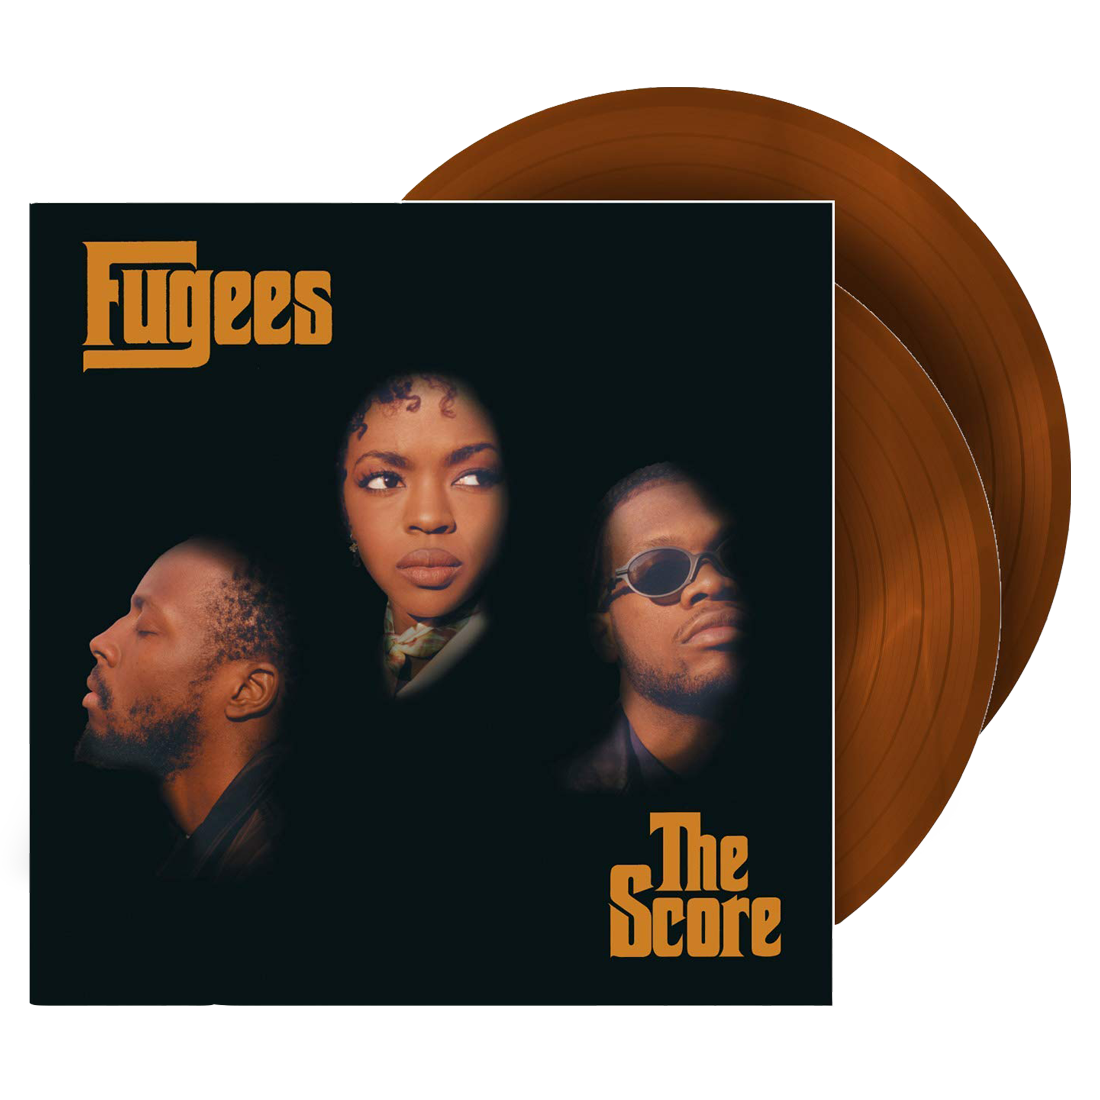 Fugees - The Score: Limited Edition Copper Vinyl